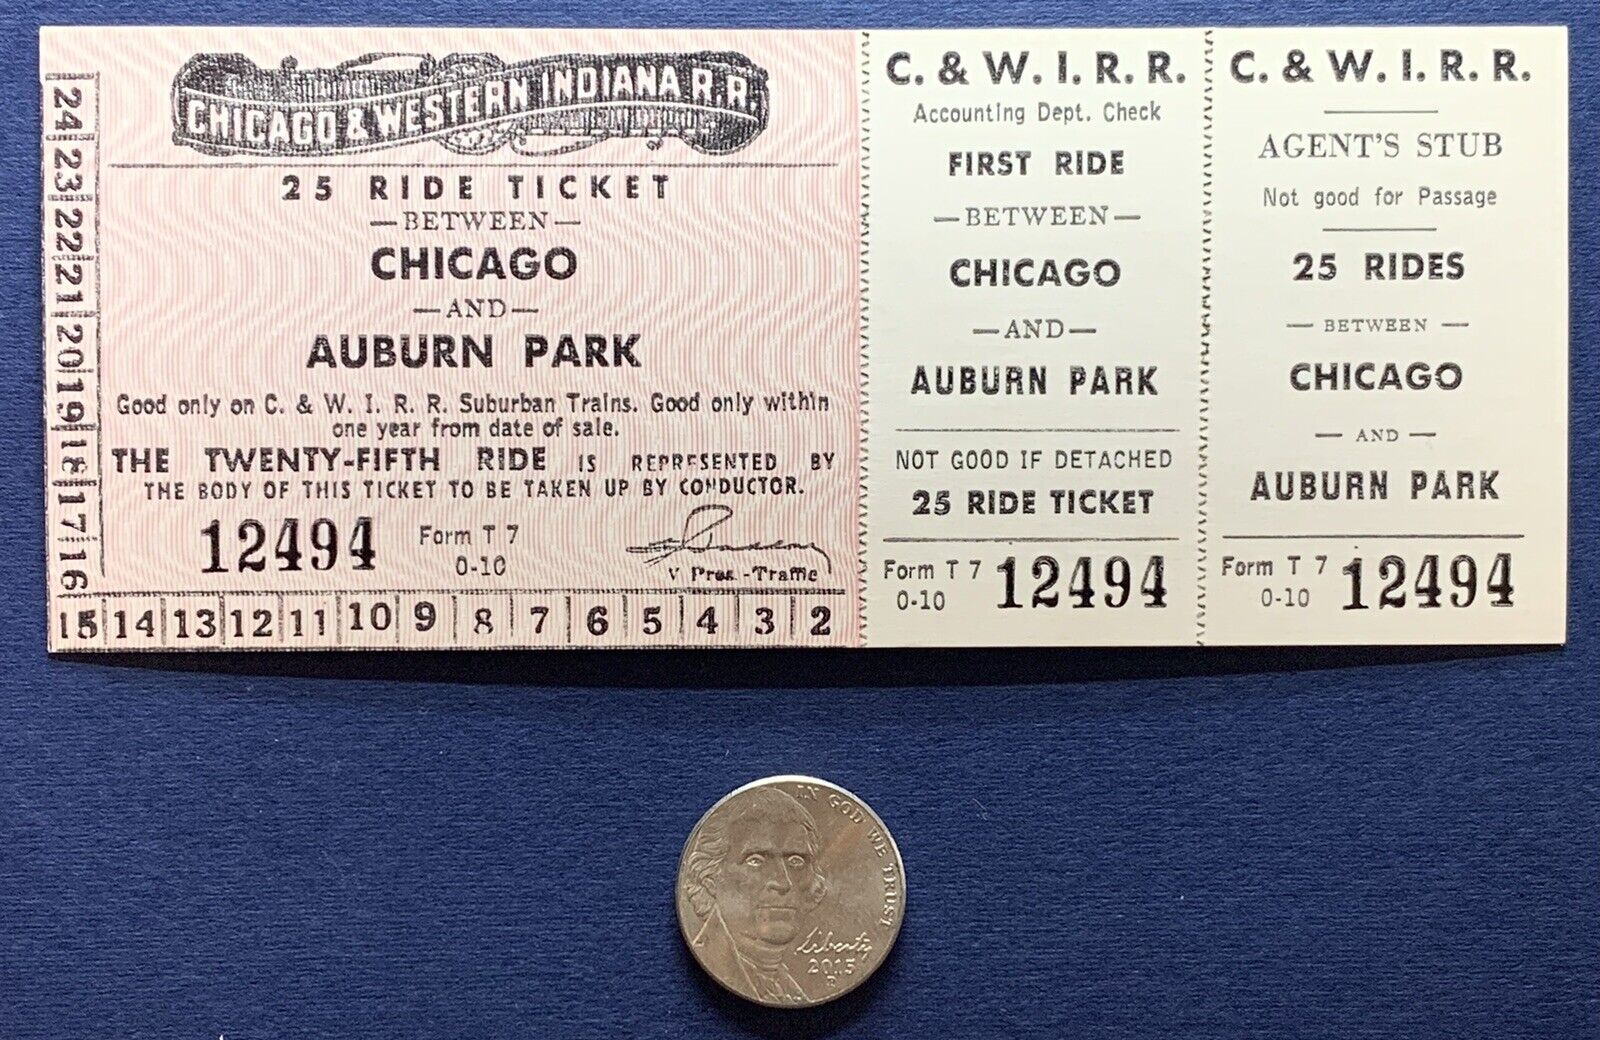 CHICAGO AND AUBURN PARK 25 RIDE TRAIN TICKET CHICAGO & WESTERN INDIANA RR #12494